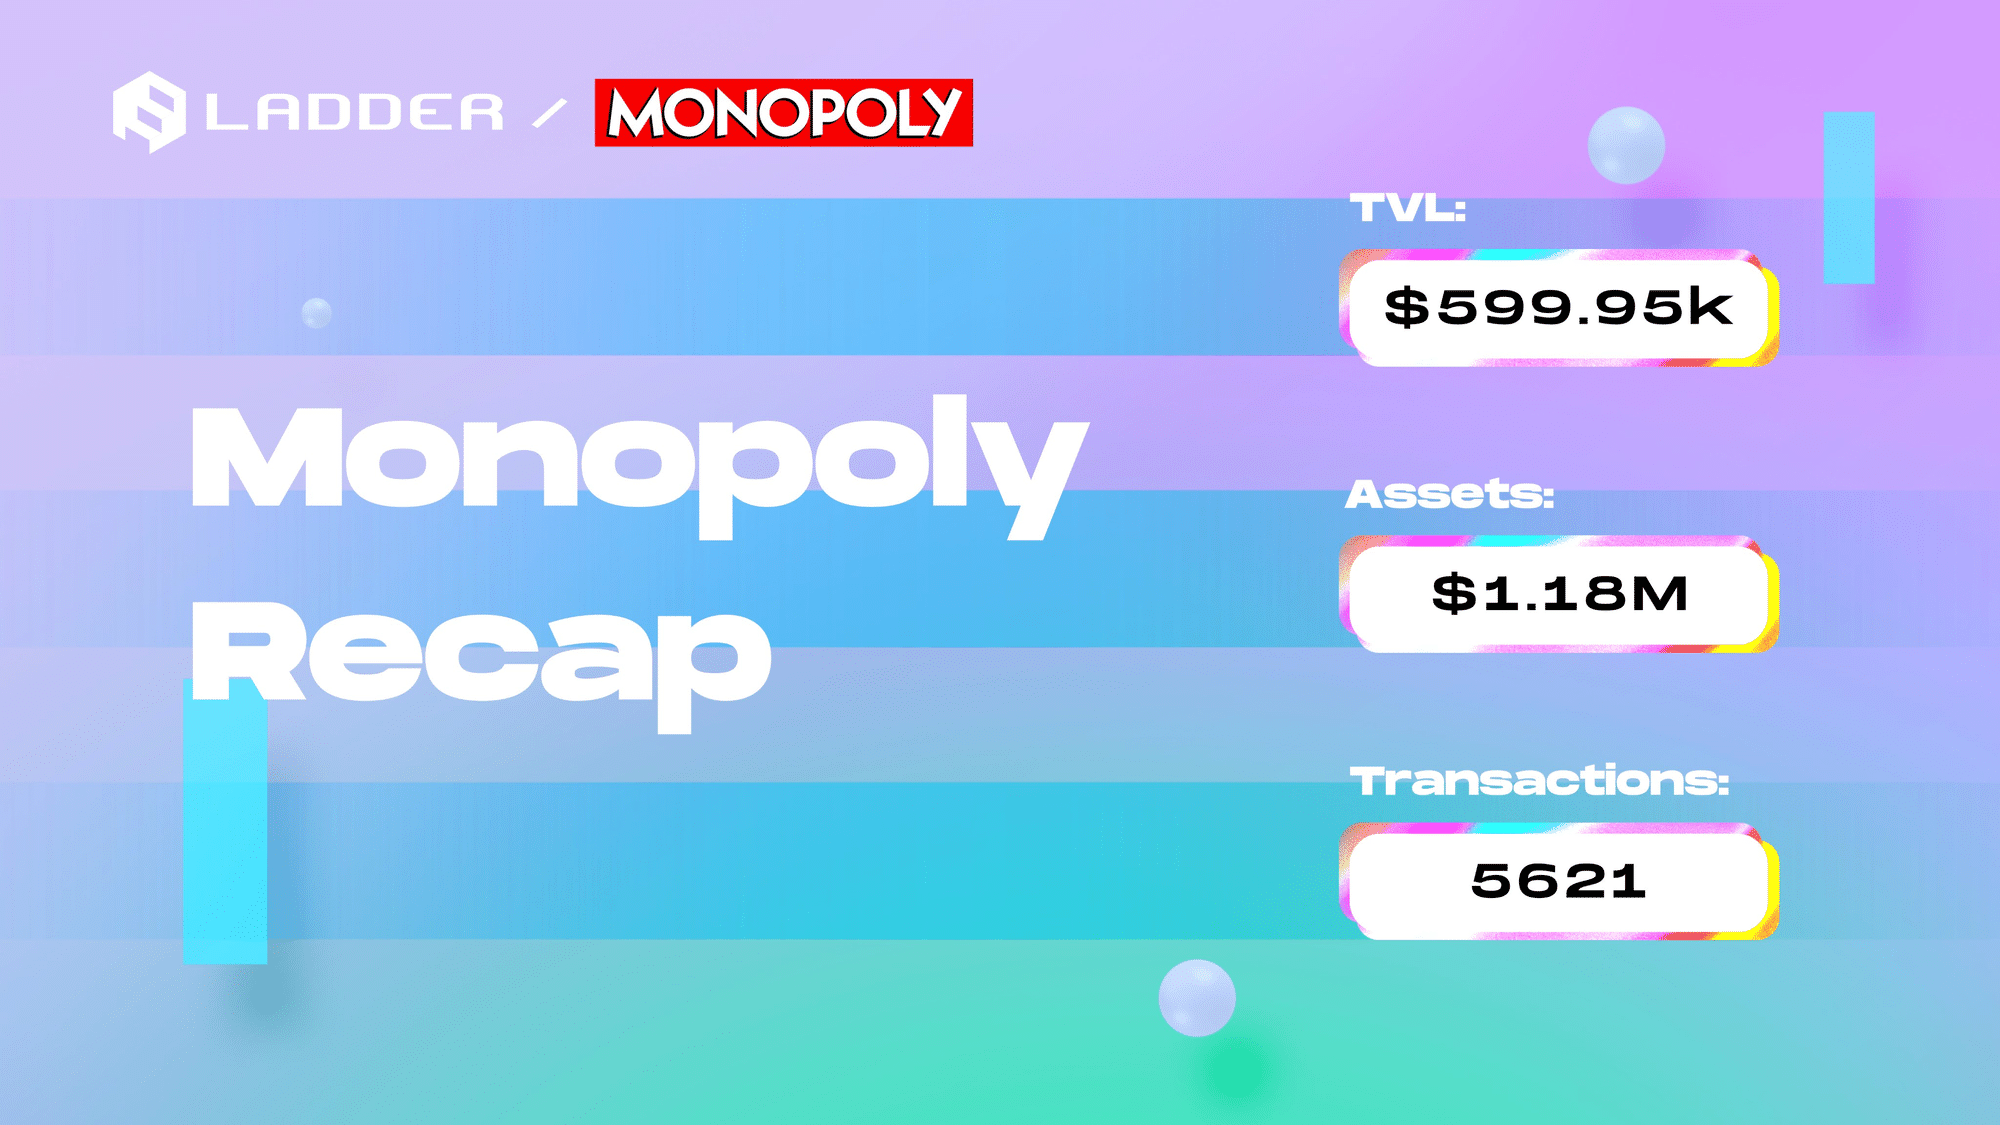 Trader Made 16,000% Profit in Ladder Monopoly NFT Trading Competition